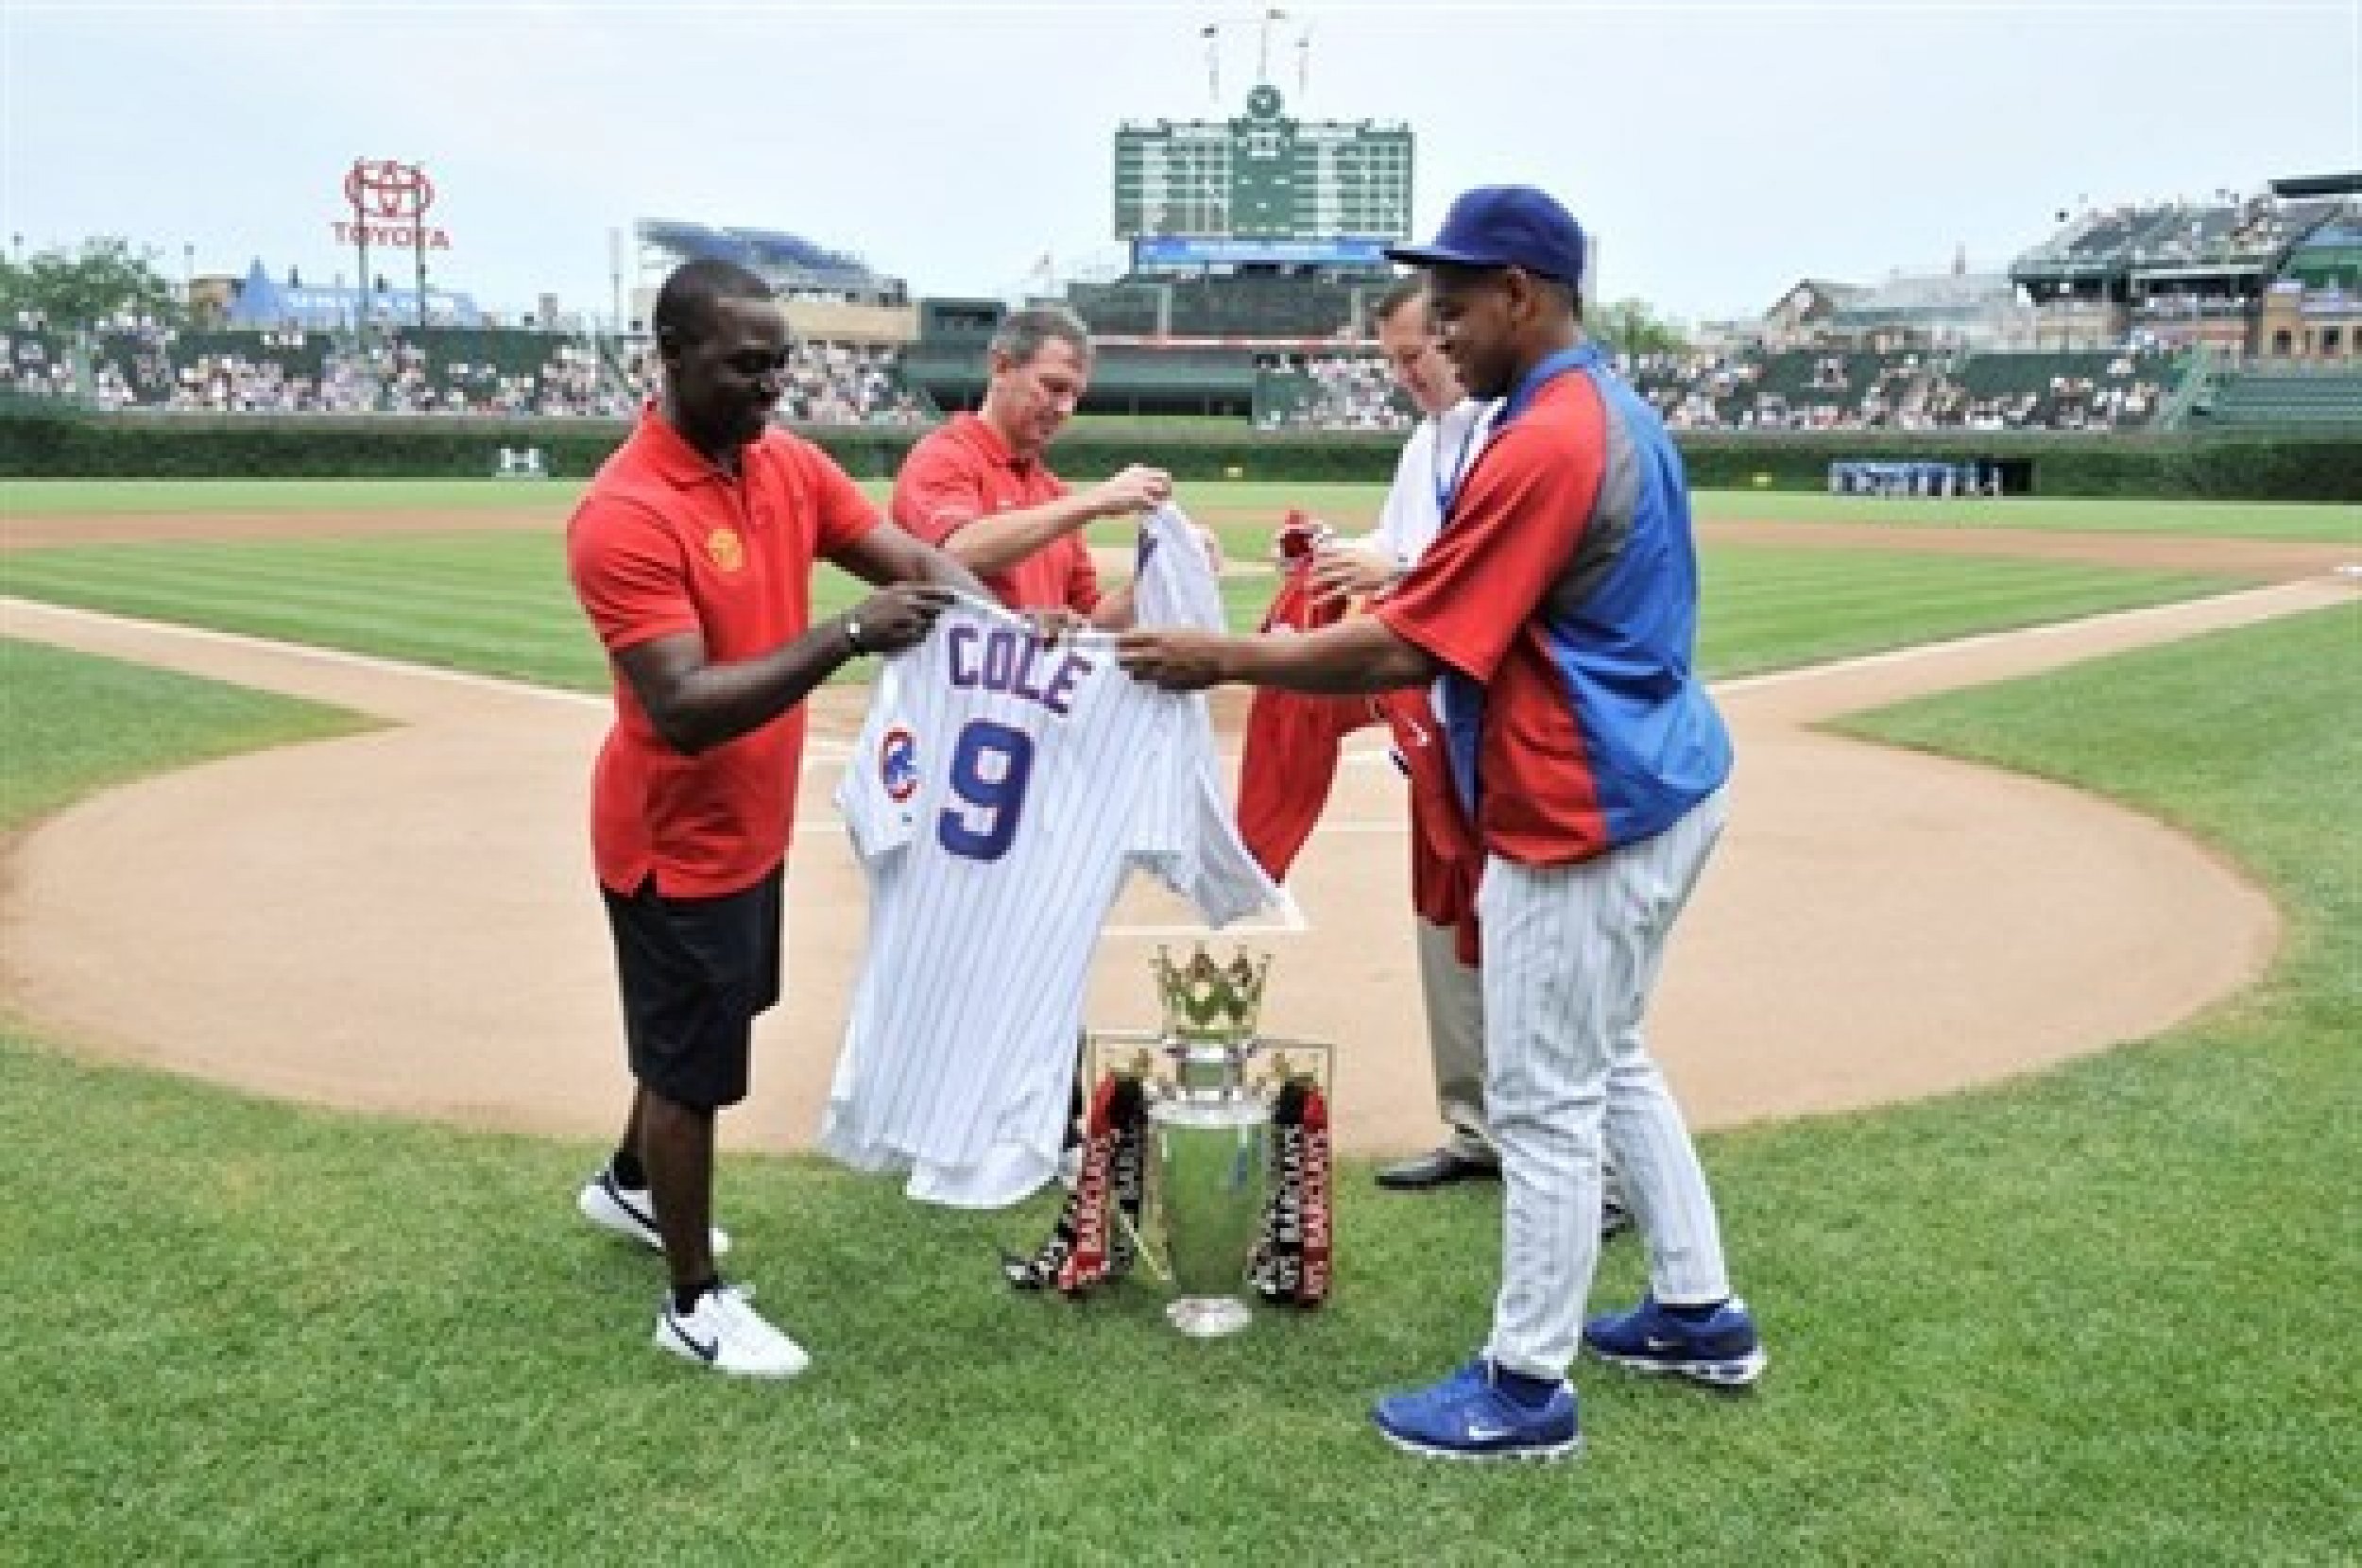 Reds legends Andy Cole and Bryan Robson exchanging shirts with Chicago Cubs owner Tom Ricketts and pitcher Carlos Marmol before a game against Houston Astros.